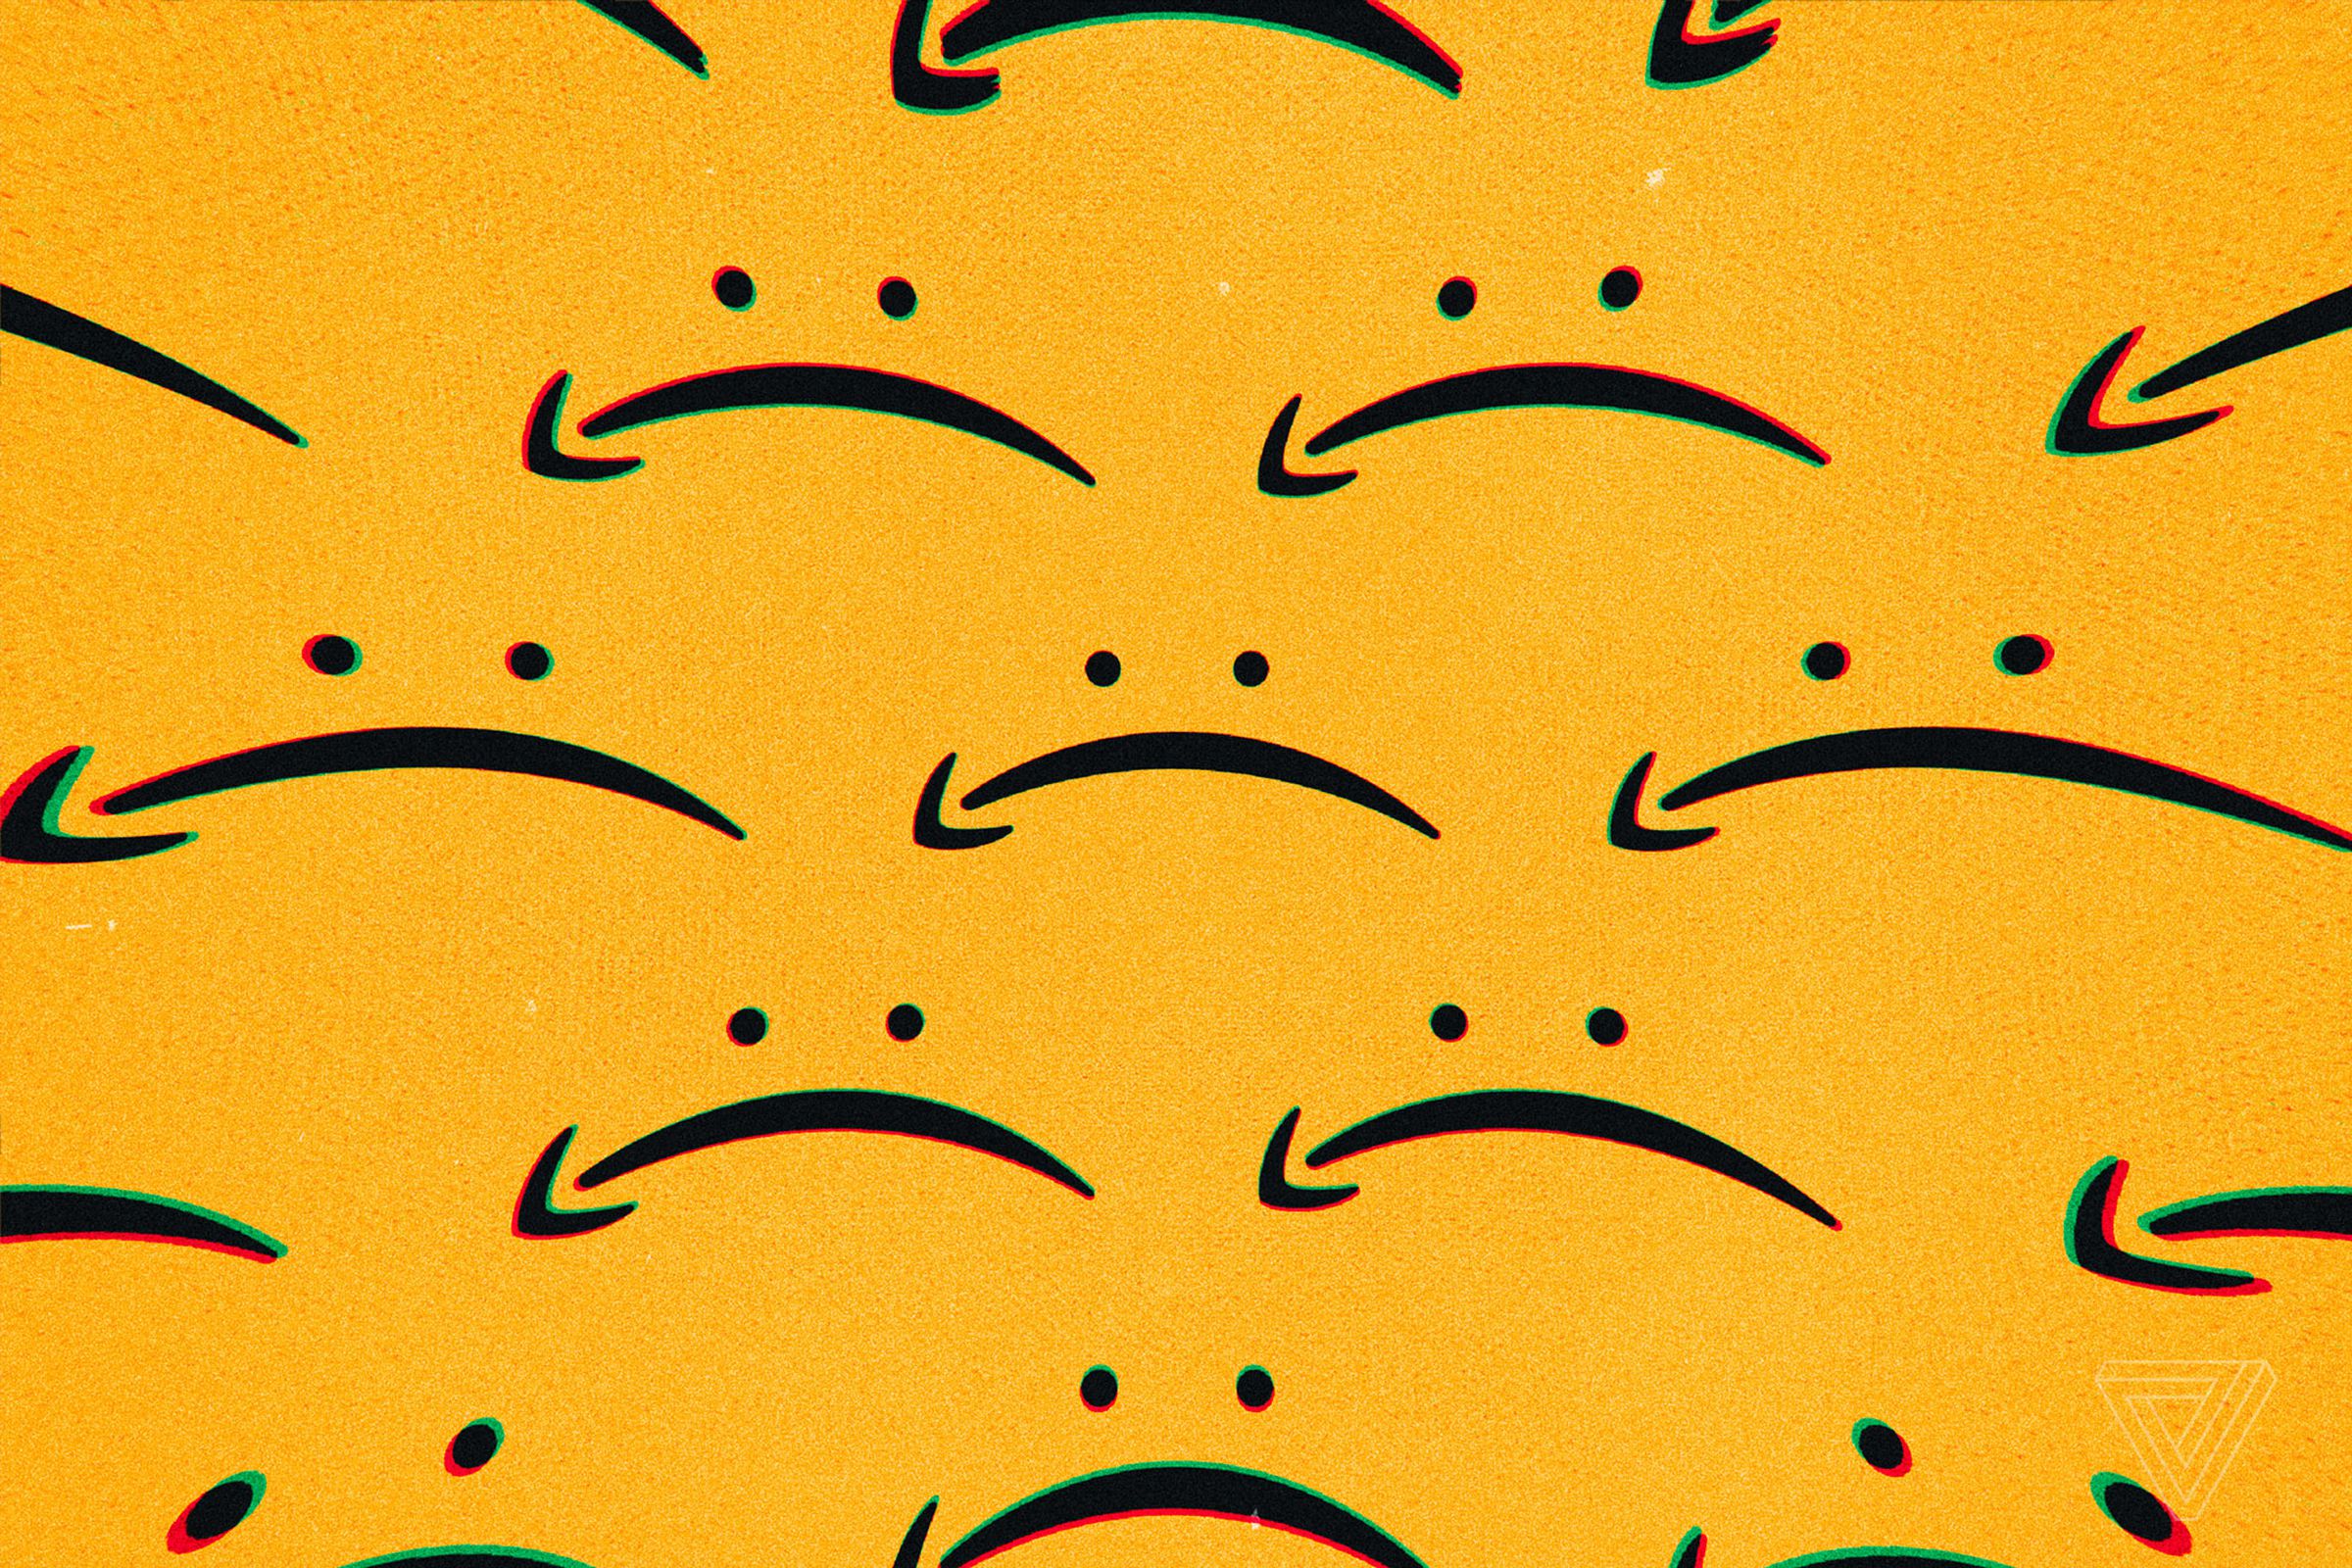 Illustration of several frowning faces made using an upside-down version of the Amazon logo.